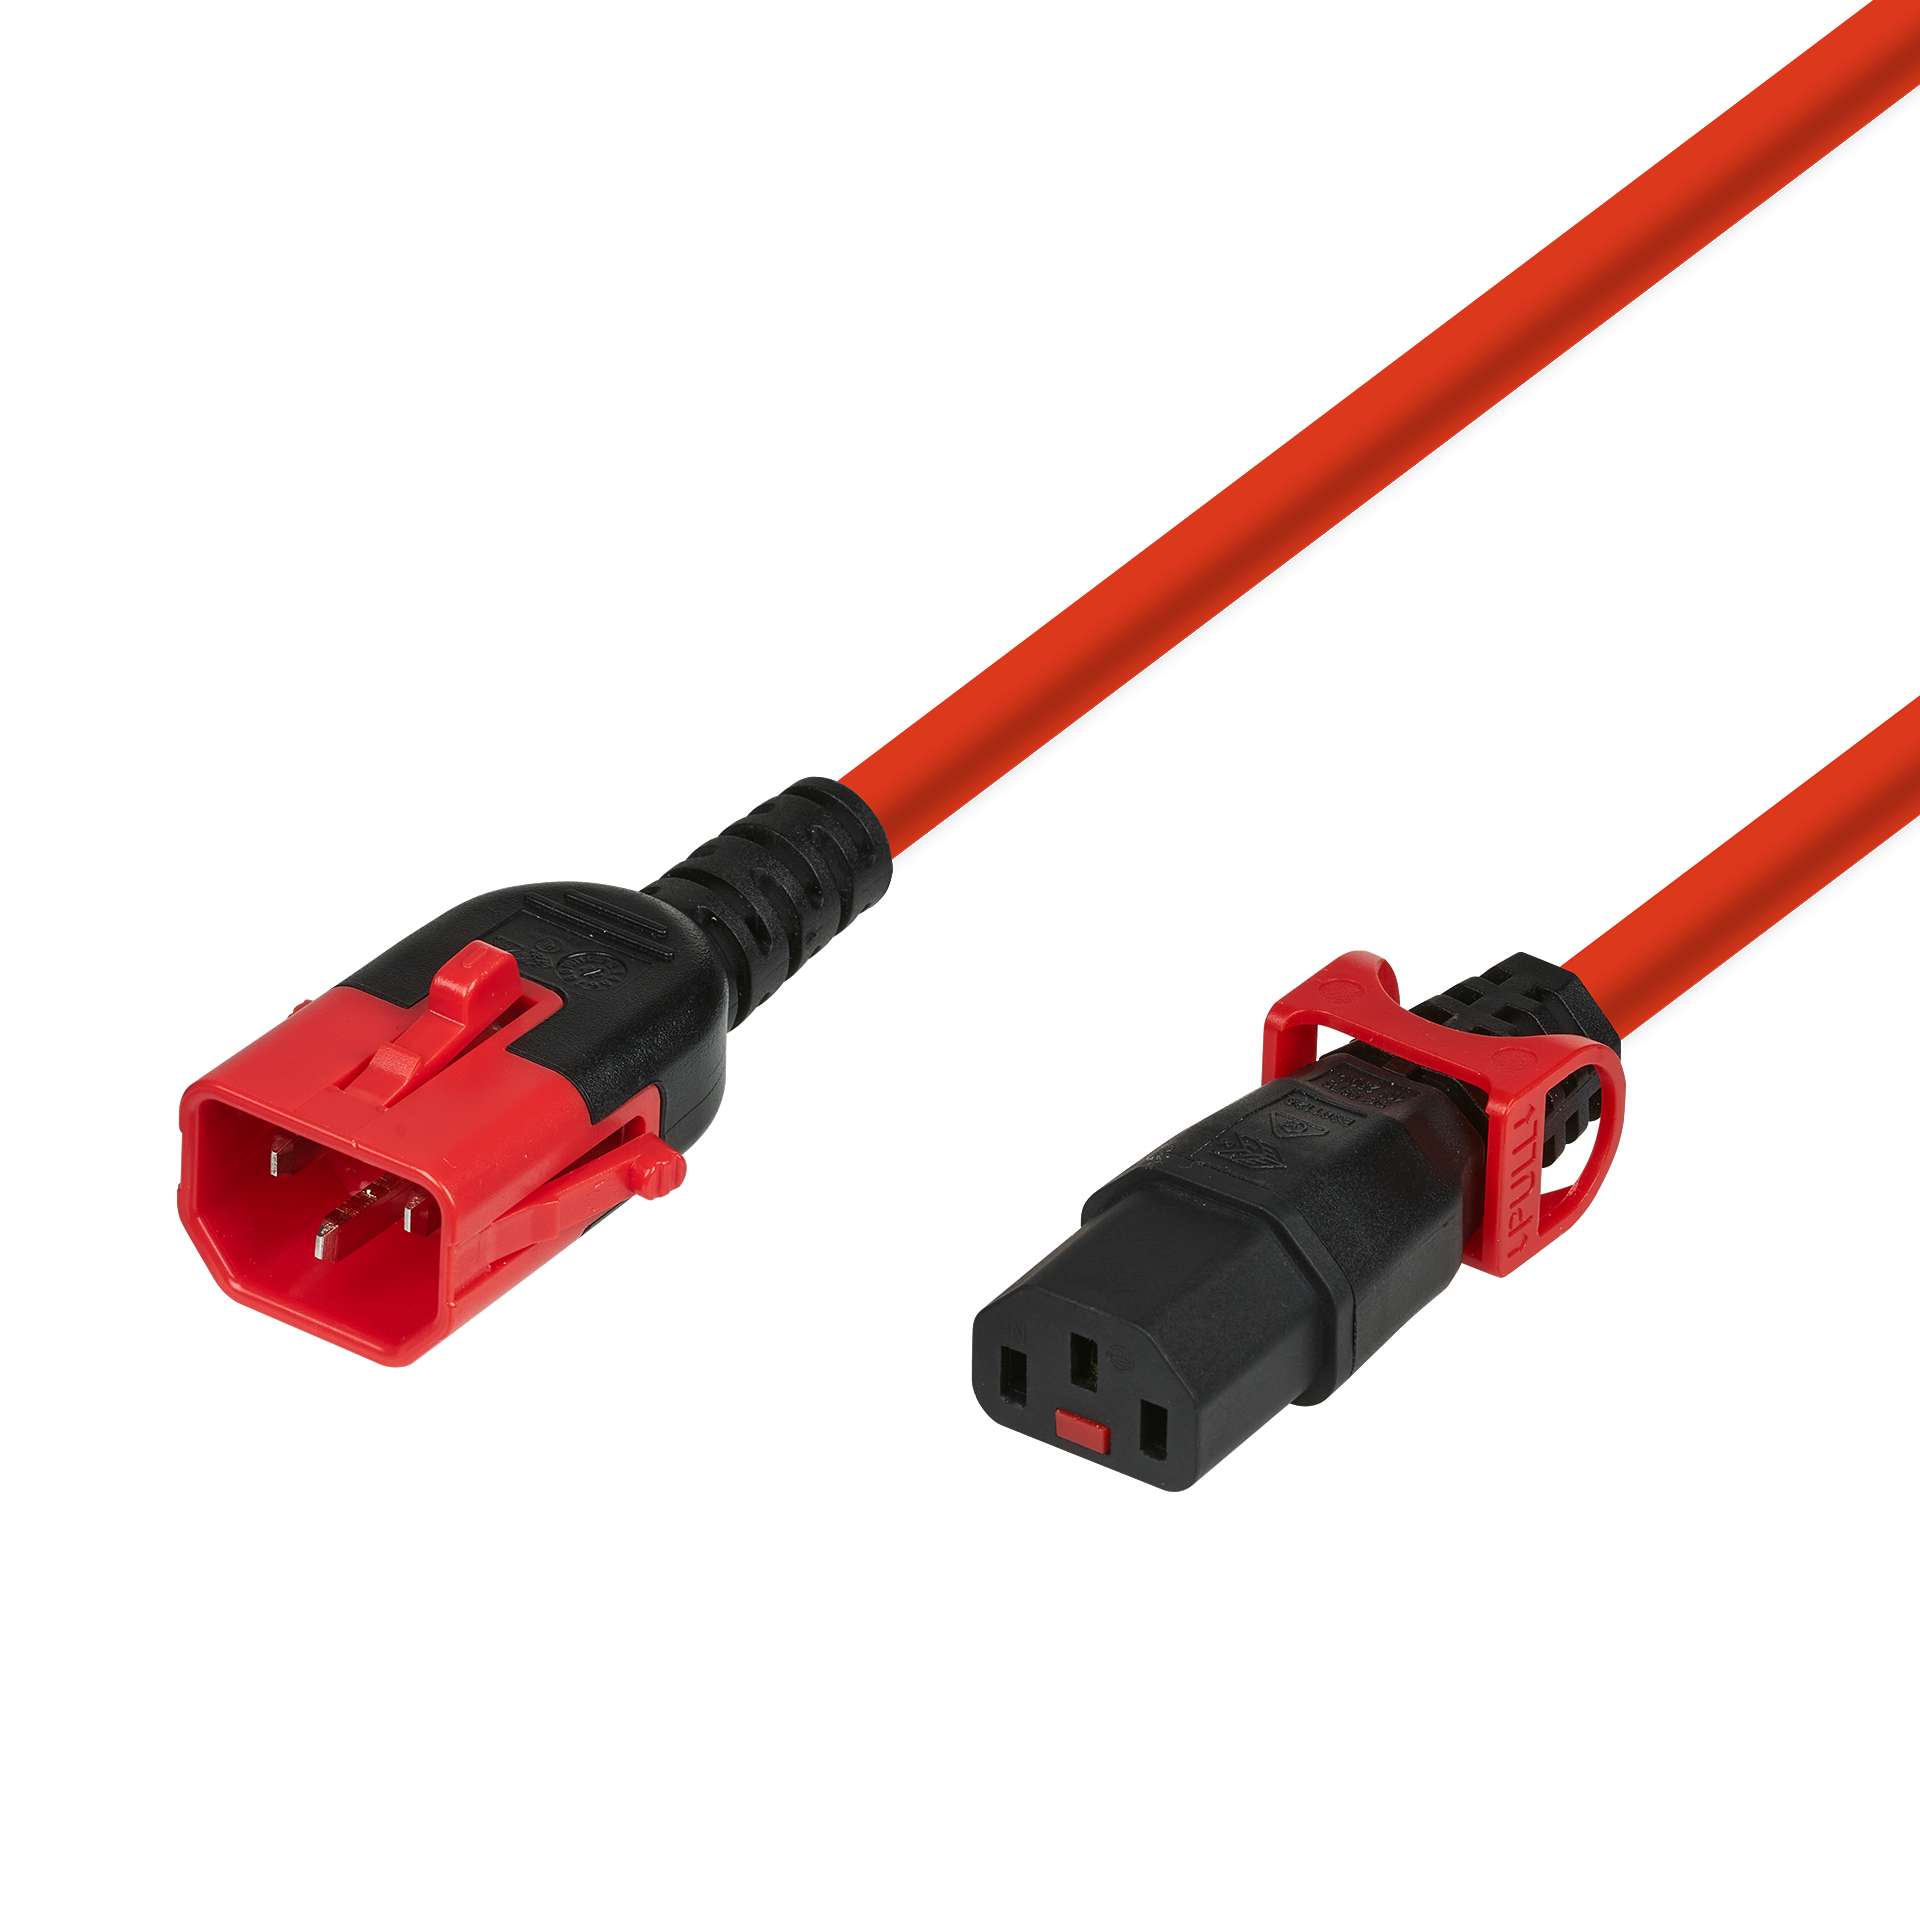 Extension Cable C14 - C13, Dual Lock, Red, 0.5 m